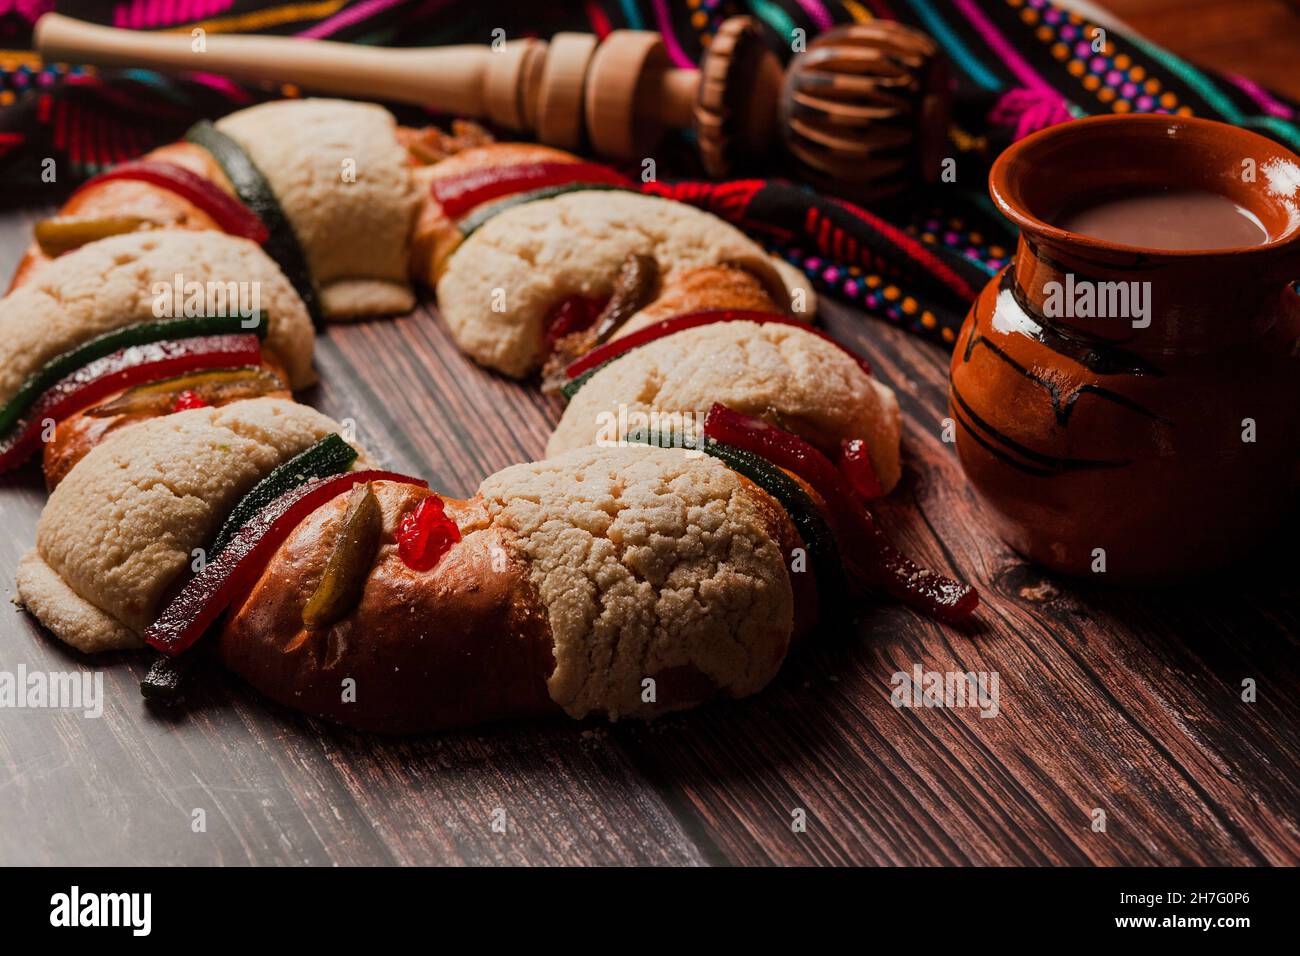 Rosca de reyes or Epiphany cake and clay mug of mexican hot chocolate on a wooden table in Mexico Latin America Stock Photo